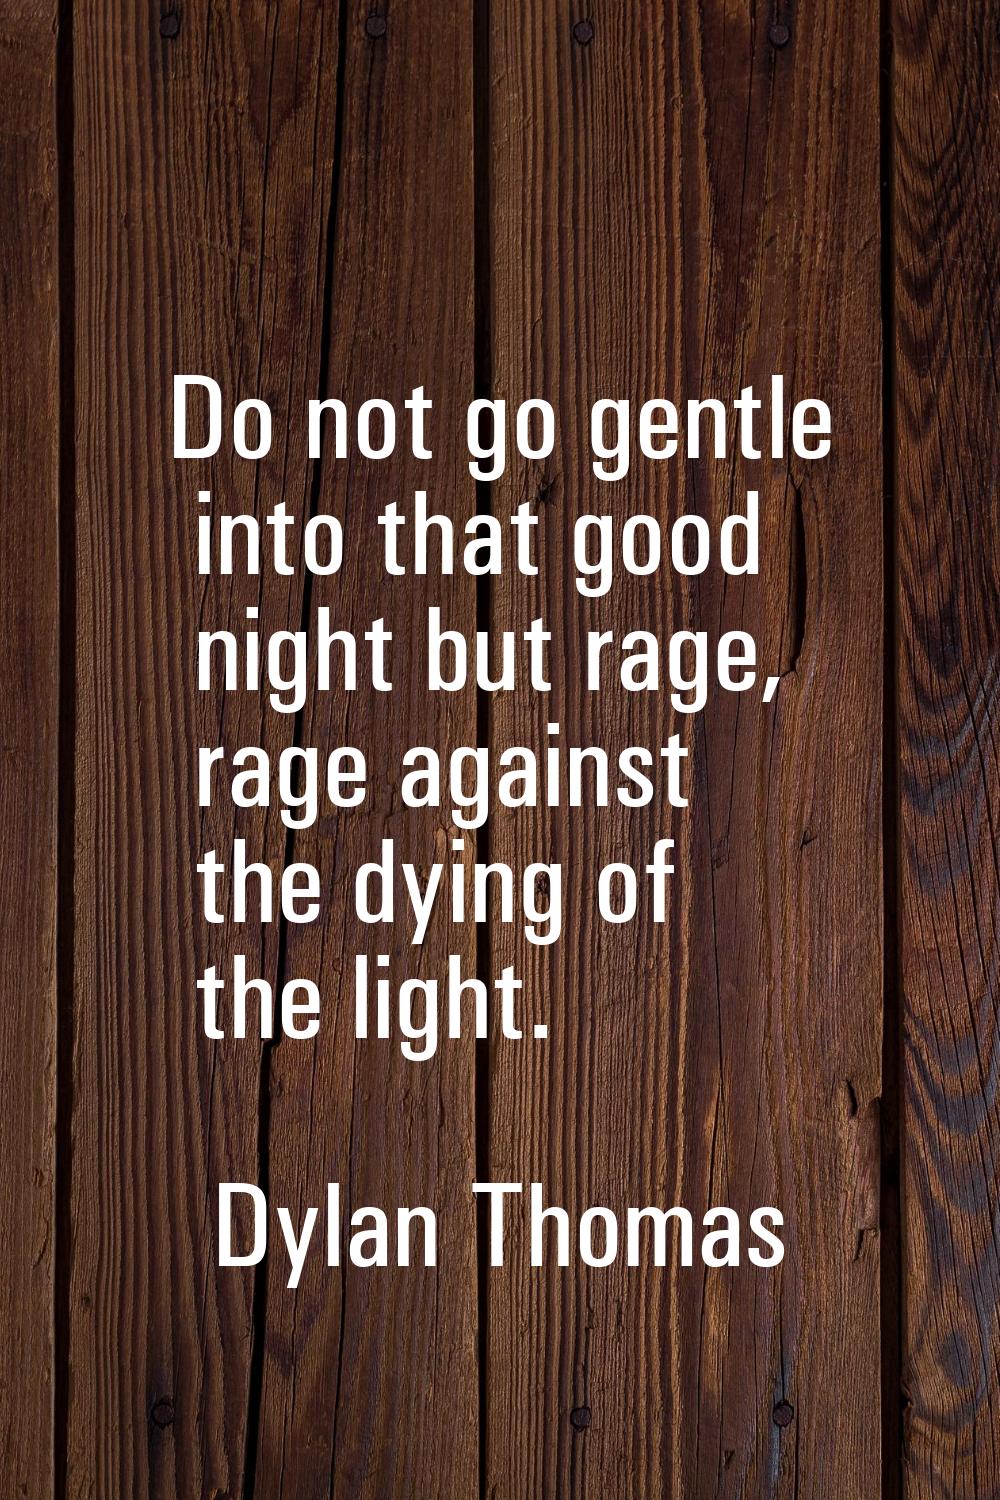 Do not go gentle into that good night but rage, rage against the dying of the light.